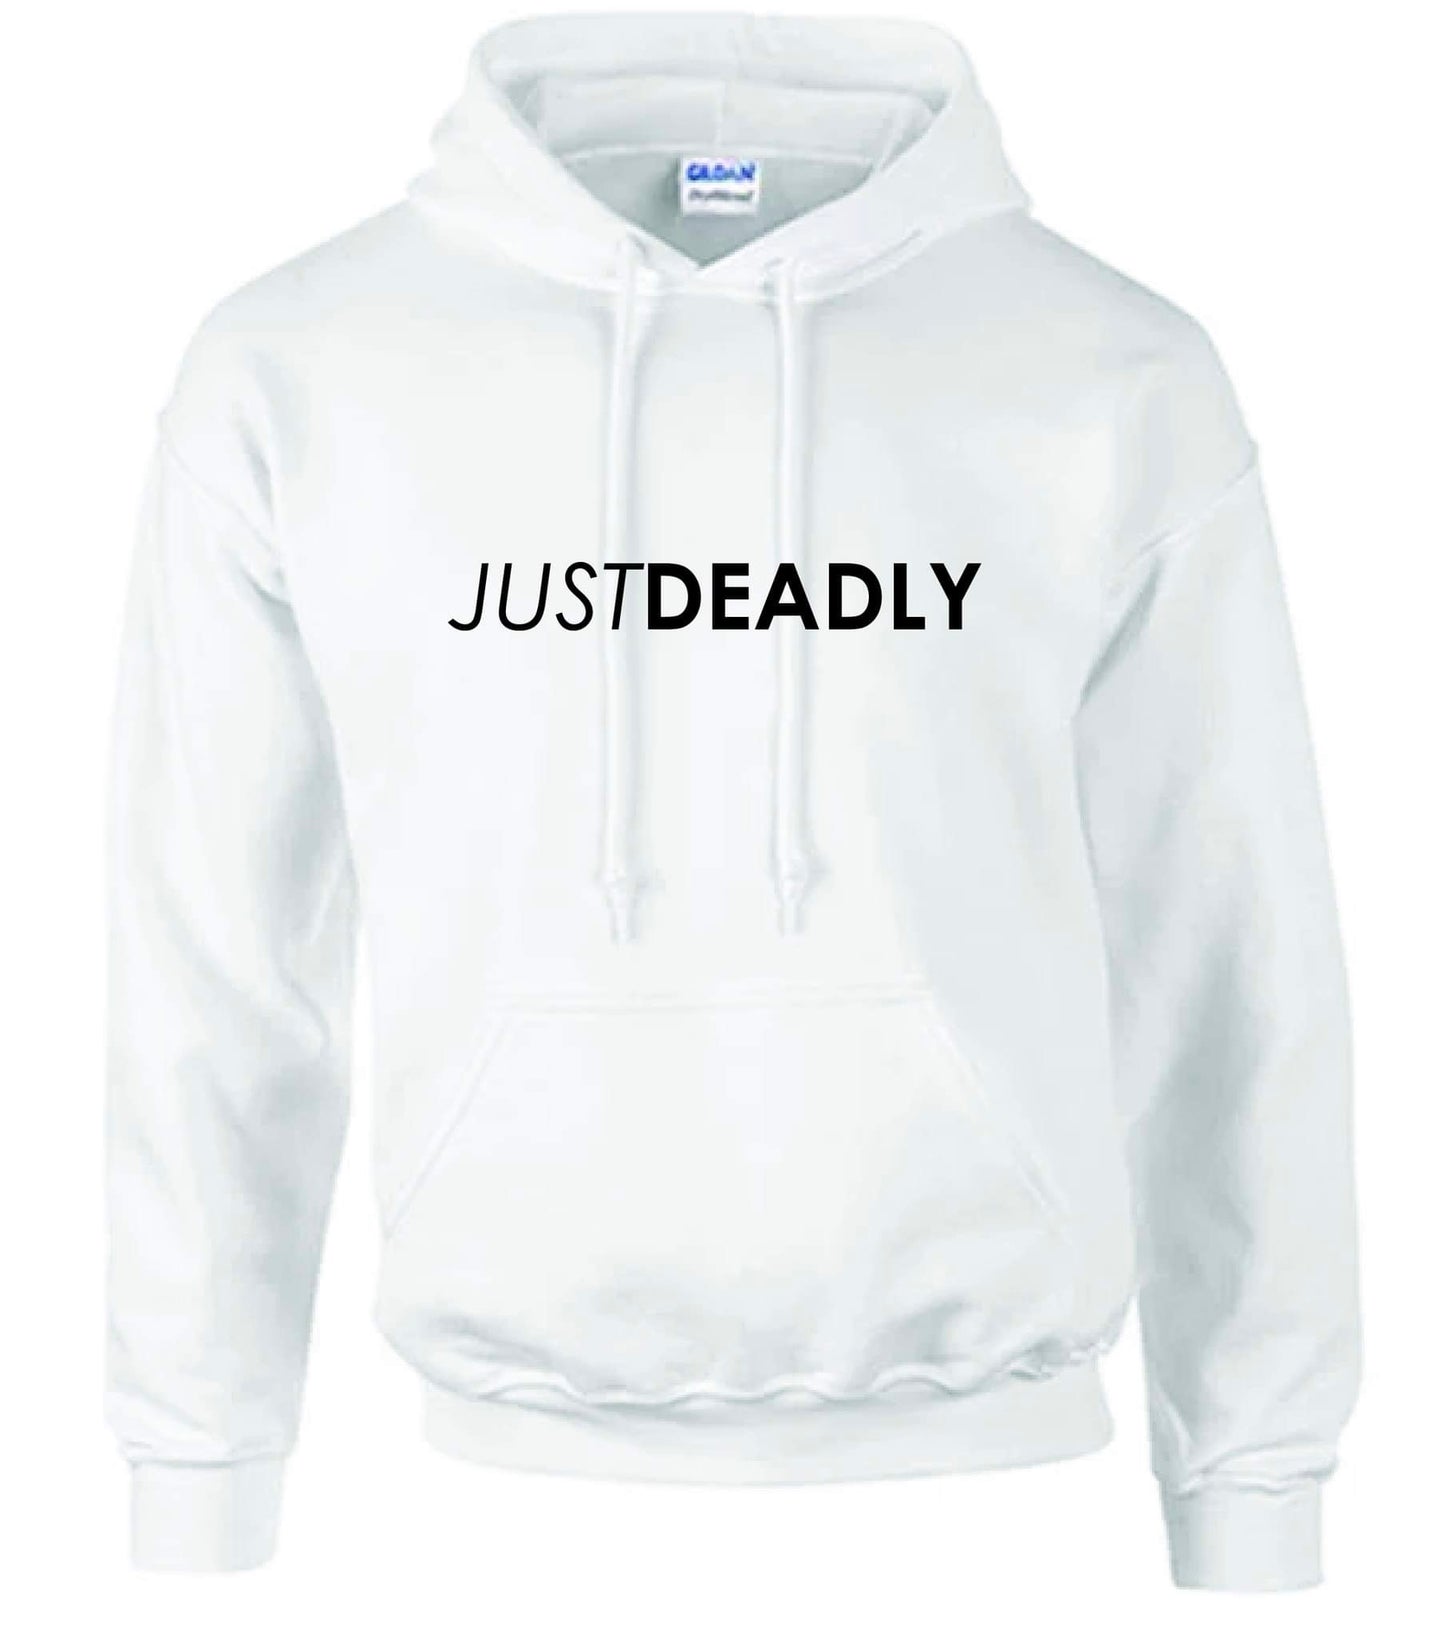 Just Deadly Hoodie